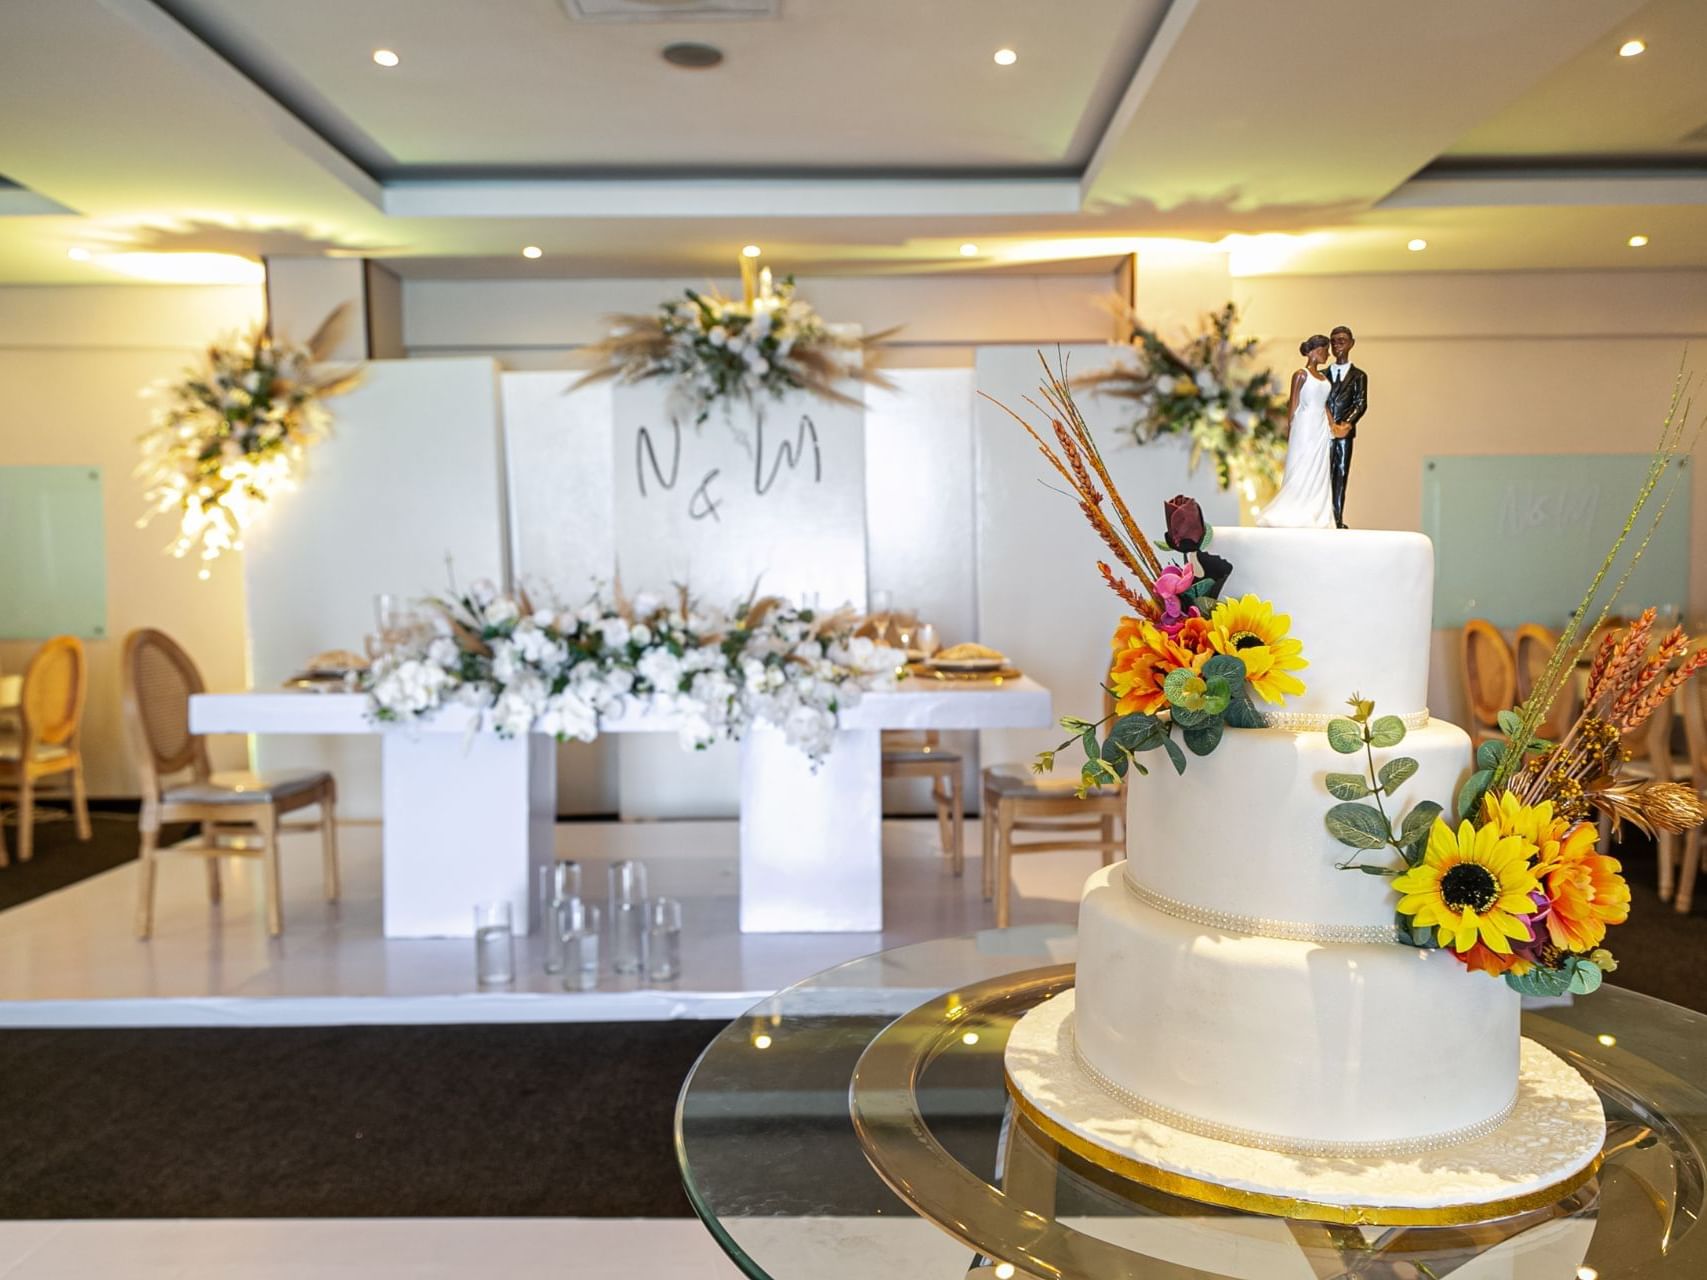 Wedding reception and cake arranged in a Hall at Cardoso Hotel